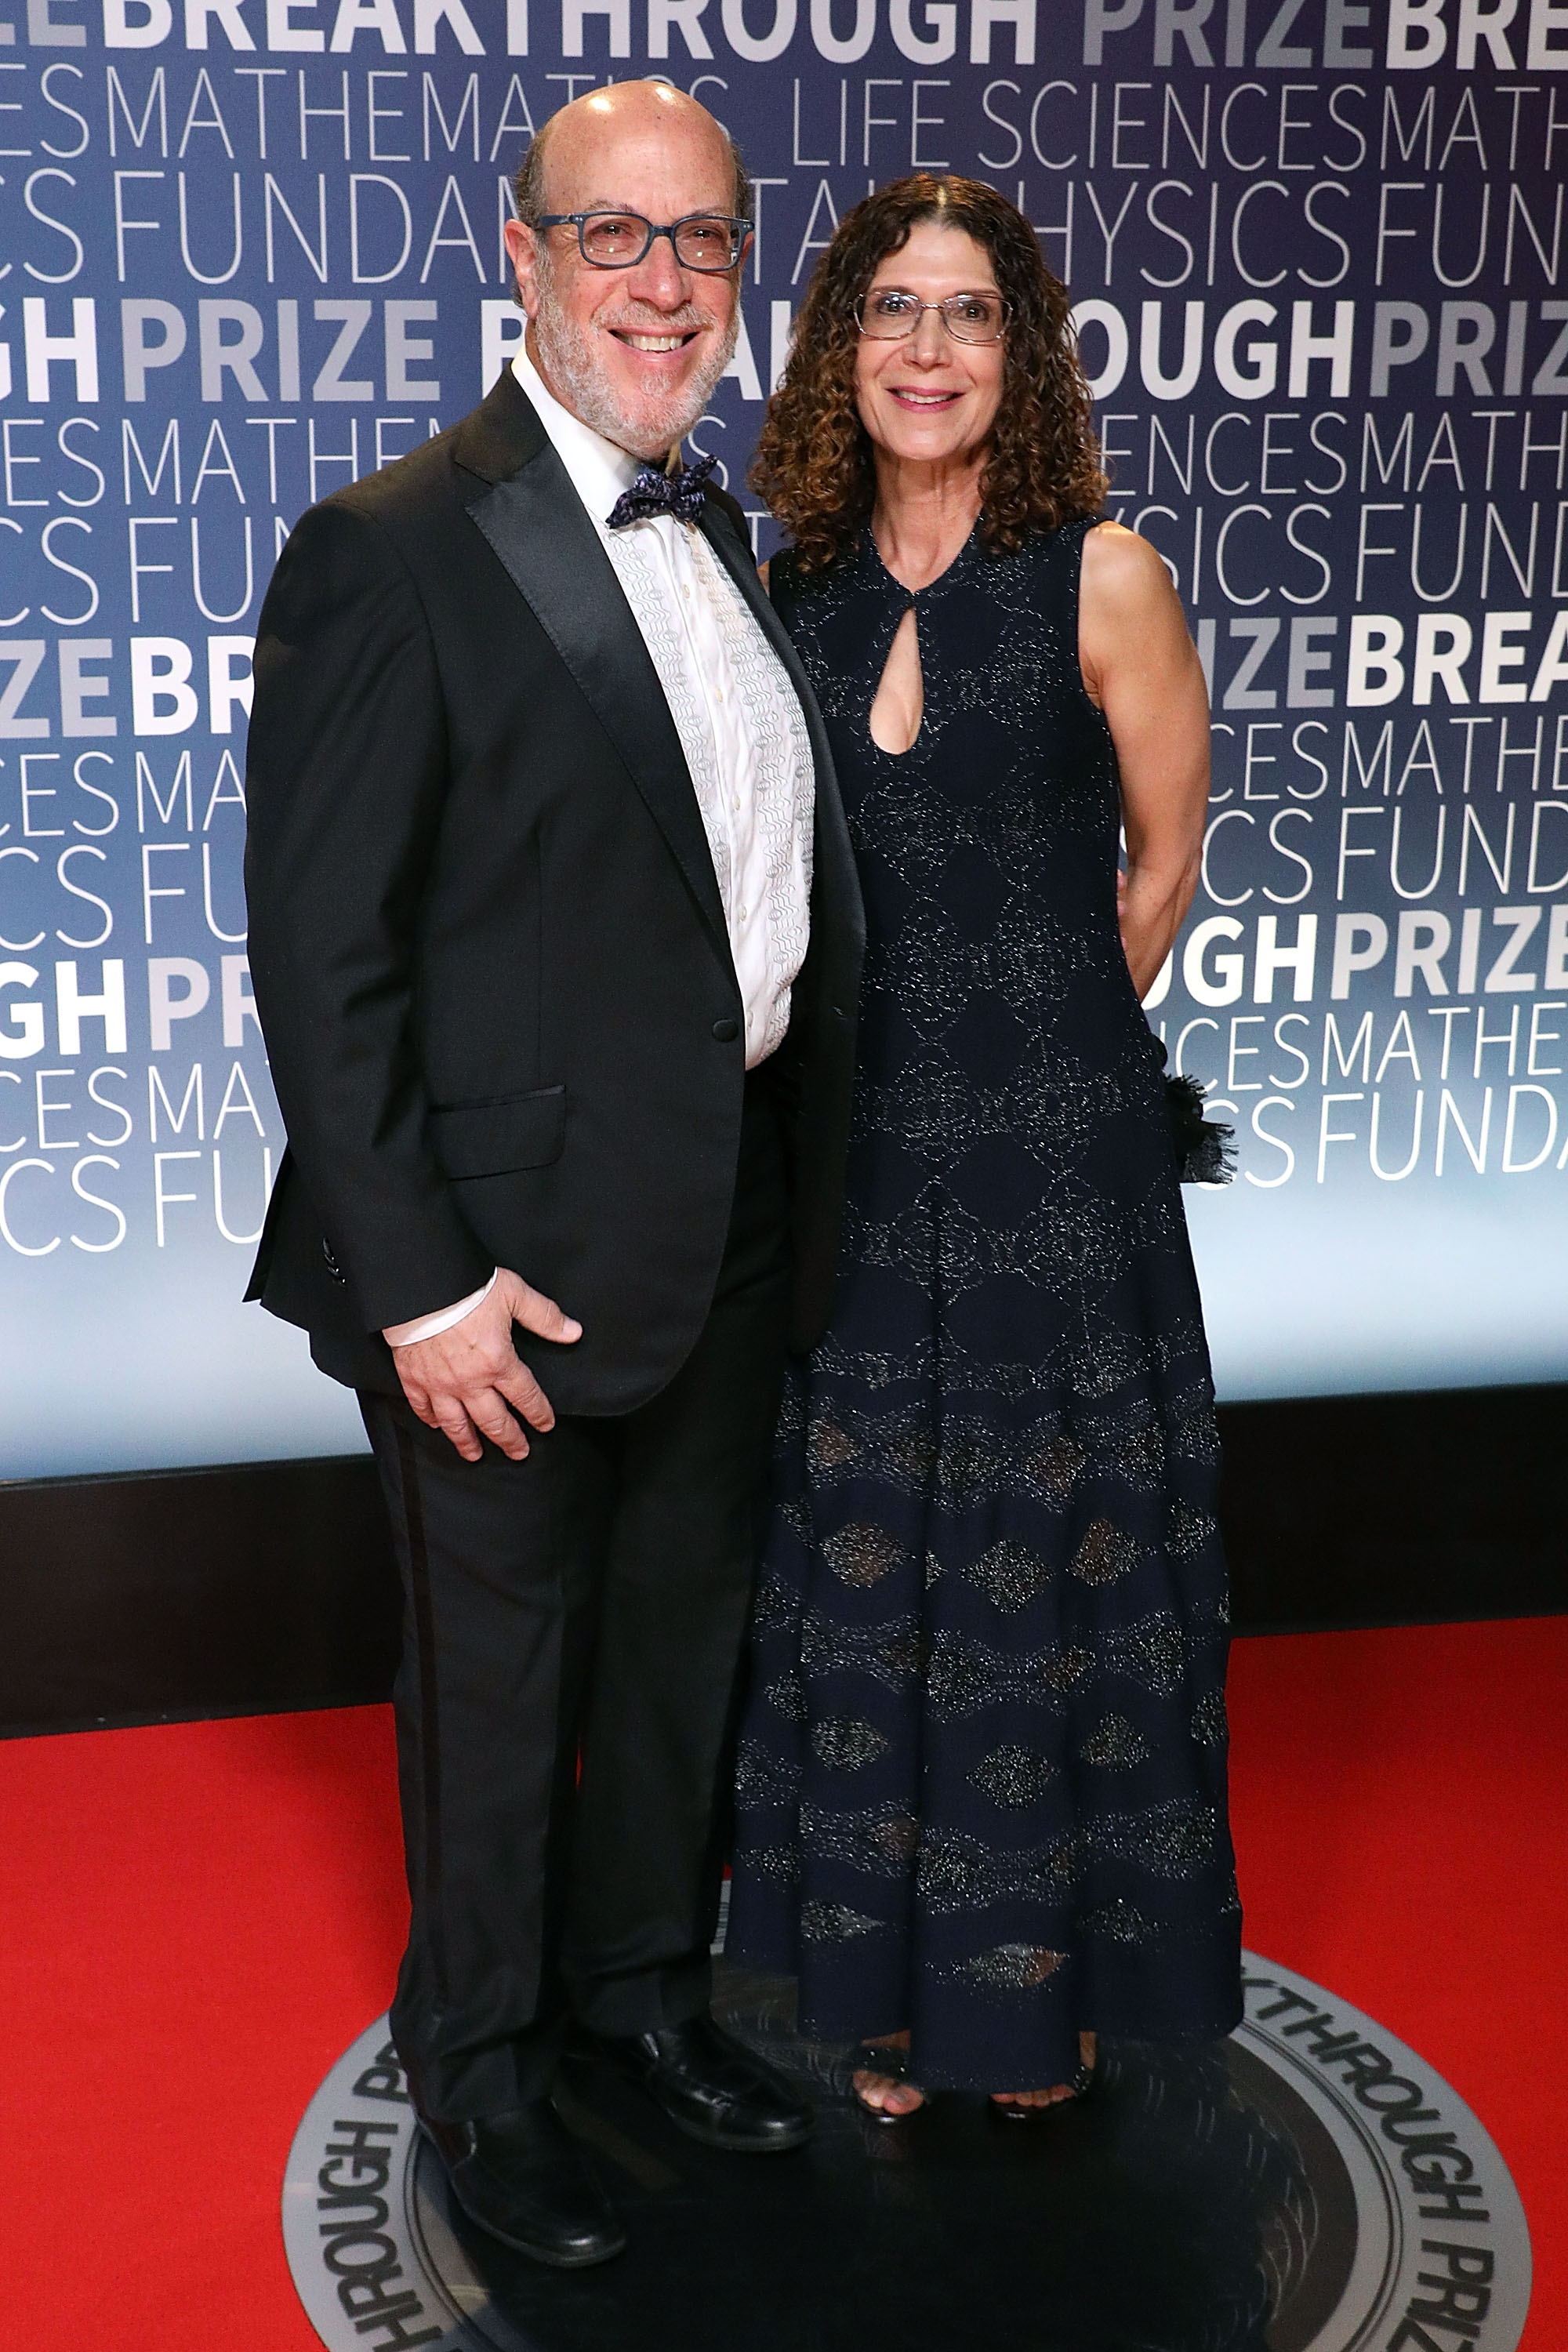 Edward Zuckerberg and Karen Kempner attend the 7th Annual Breakthrough Prize Ceremony at NASA Ames Research Center on November 4, 2018, in Mountain View, California. | Source: Getty Images